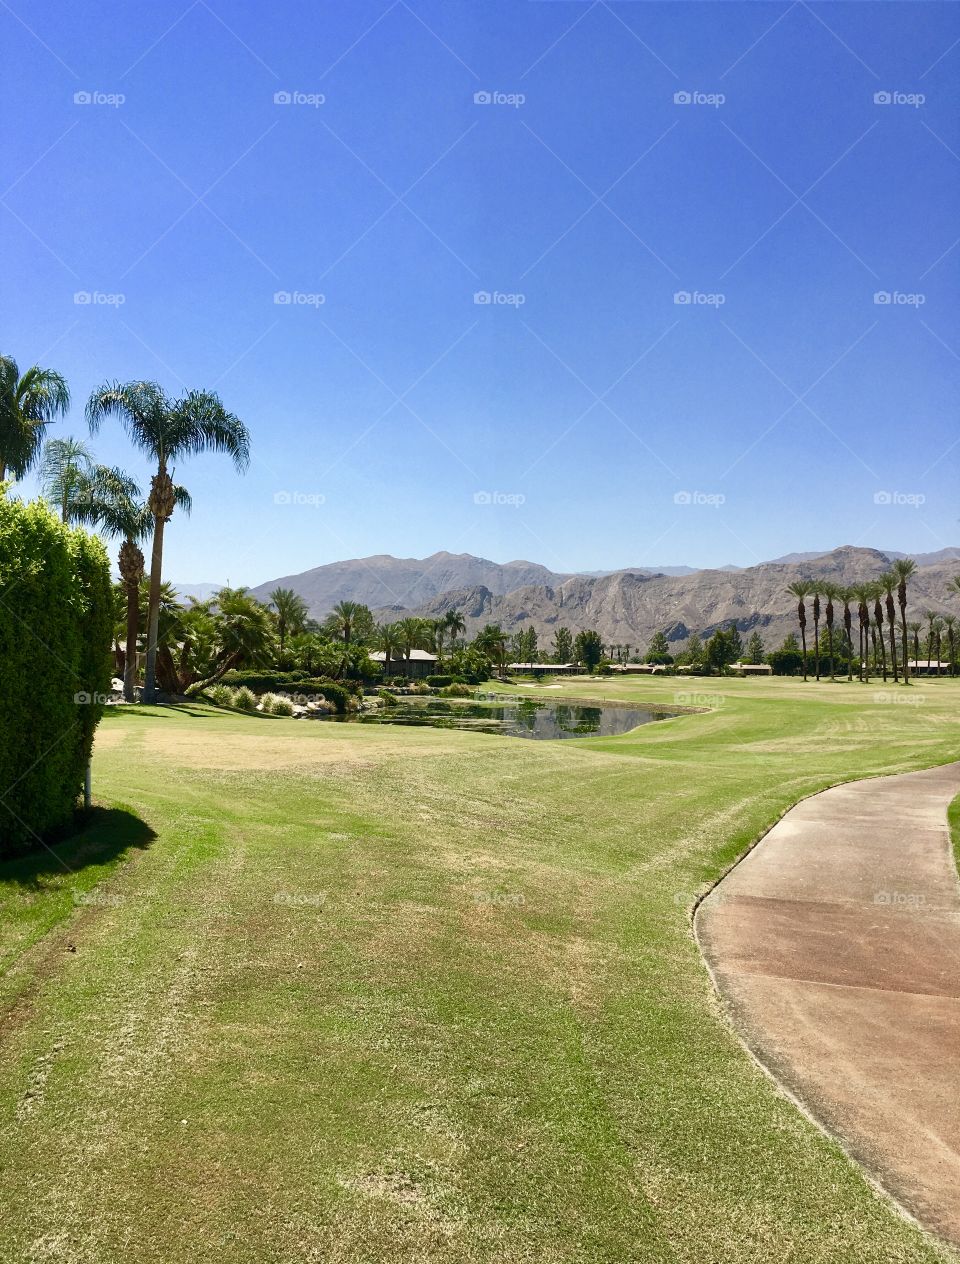 Blue sky, green grass, Mountain View, and palm trees. It’s a beautiful day for golfing or just hanging out. 